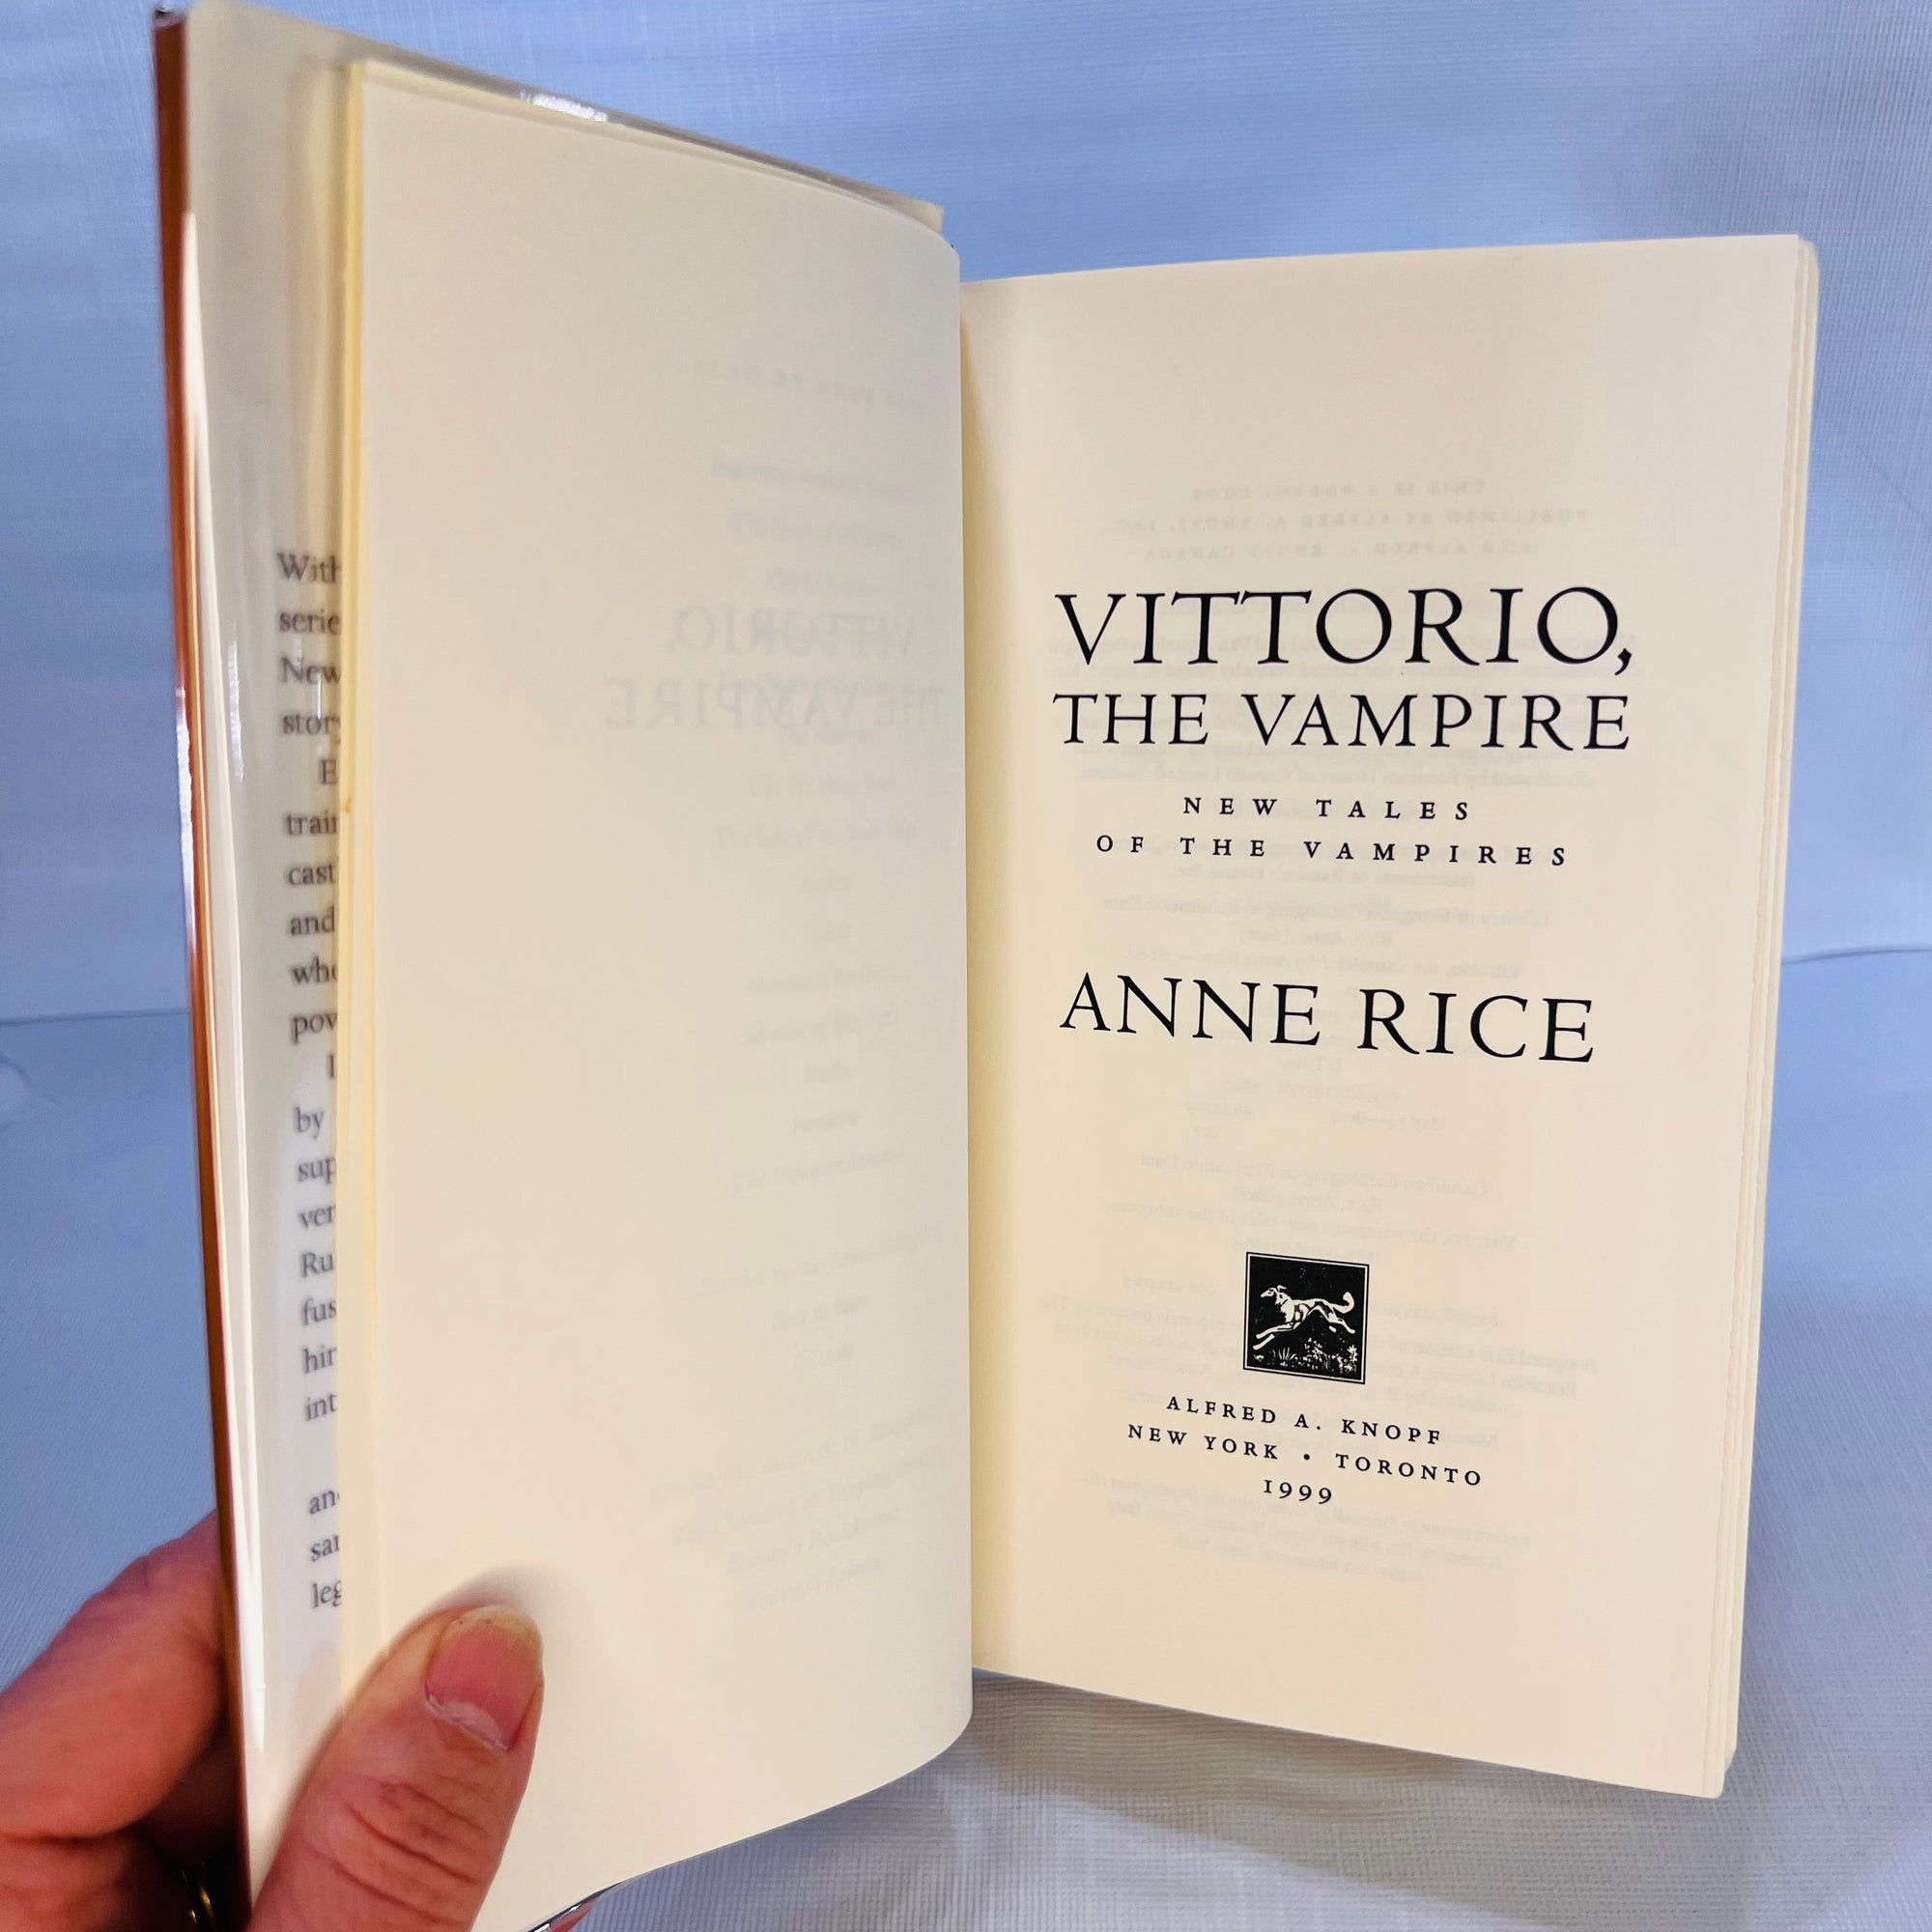 Vittorio The Vampire by Anne Rice 1999 First Trade Edition Alfred A. Knopf